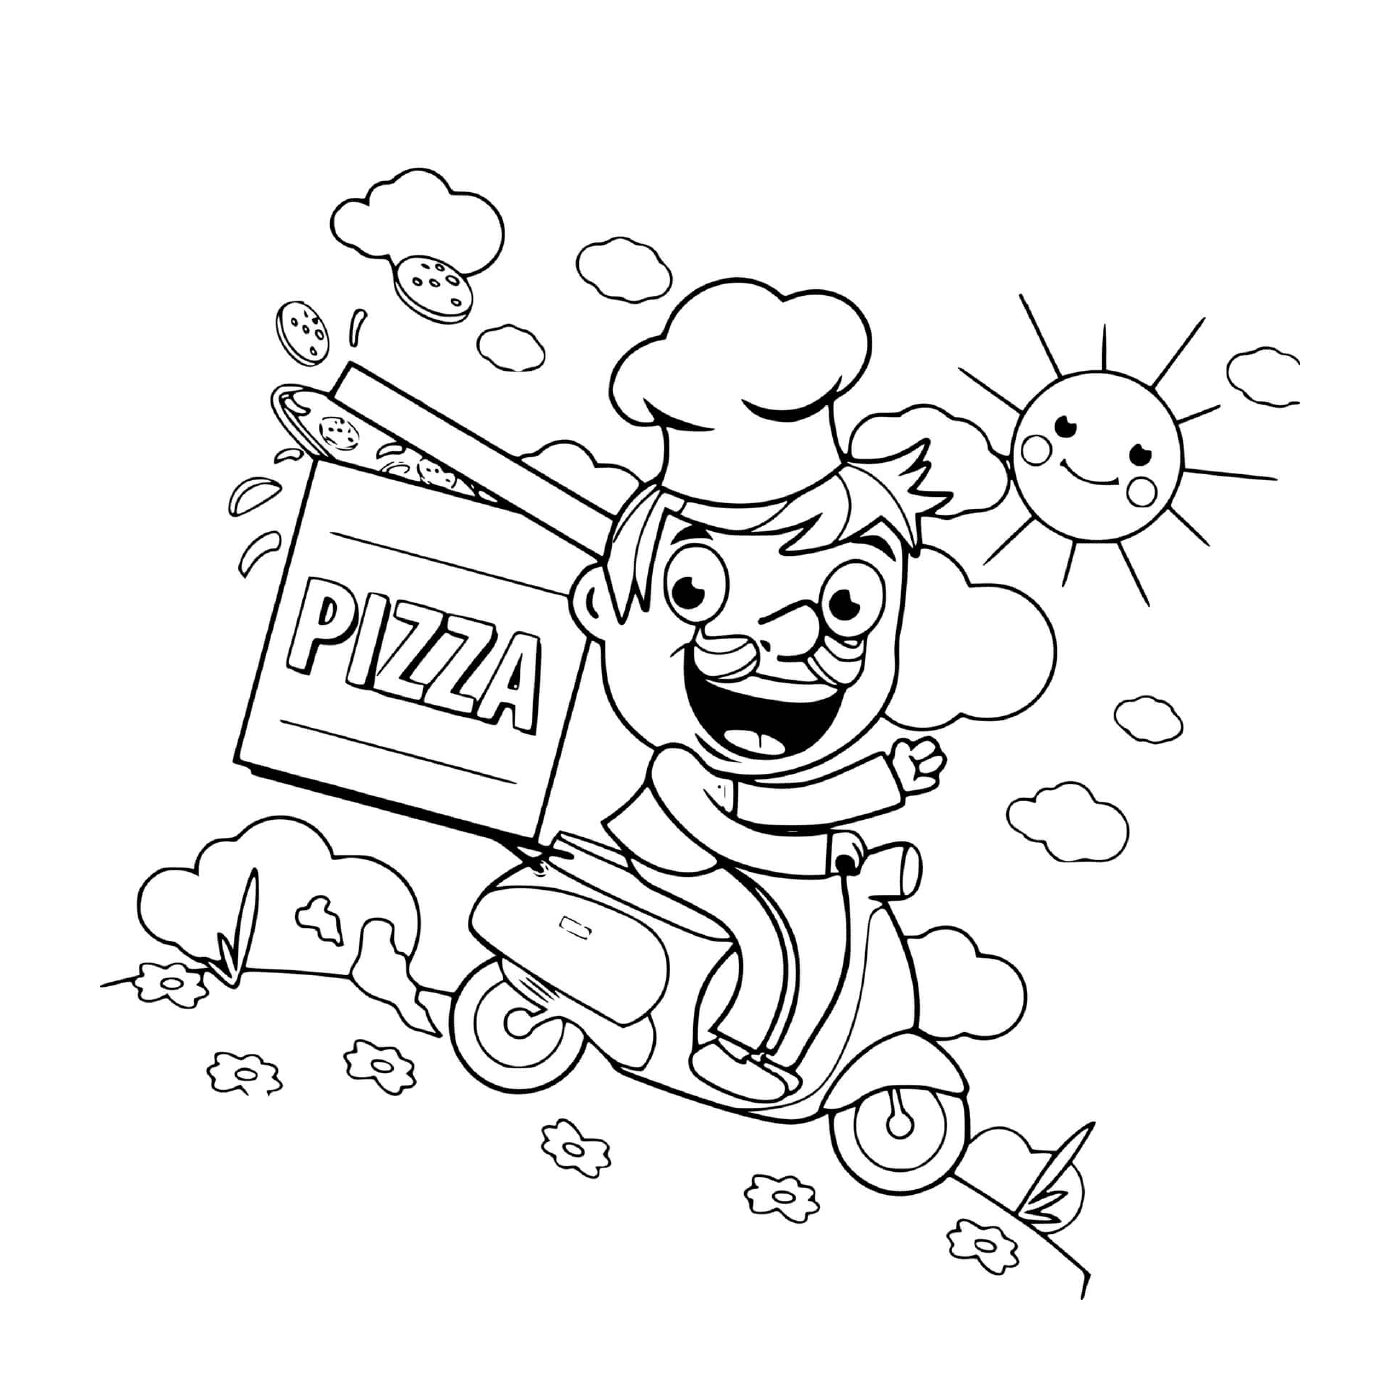  A pizza delivery machine by scooter 